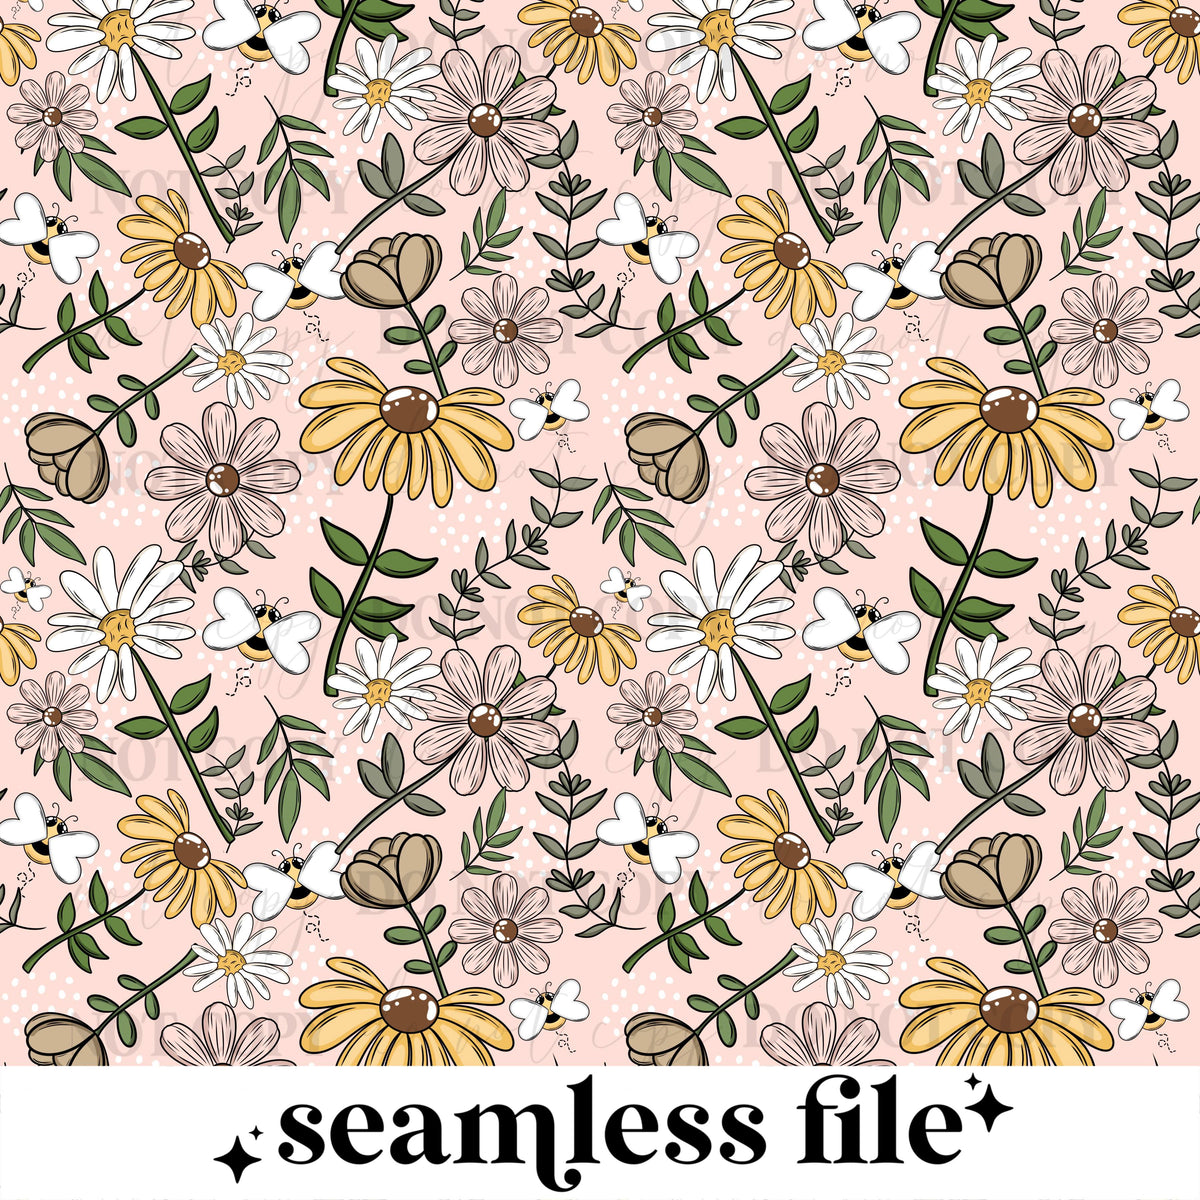 Floral Bees Seamless